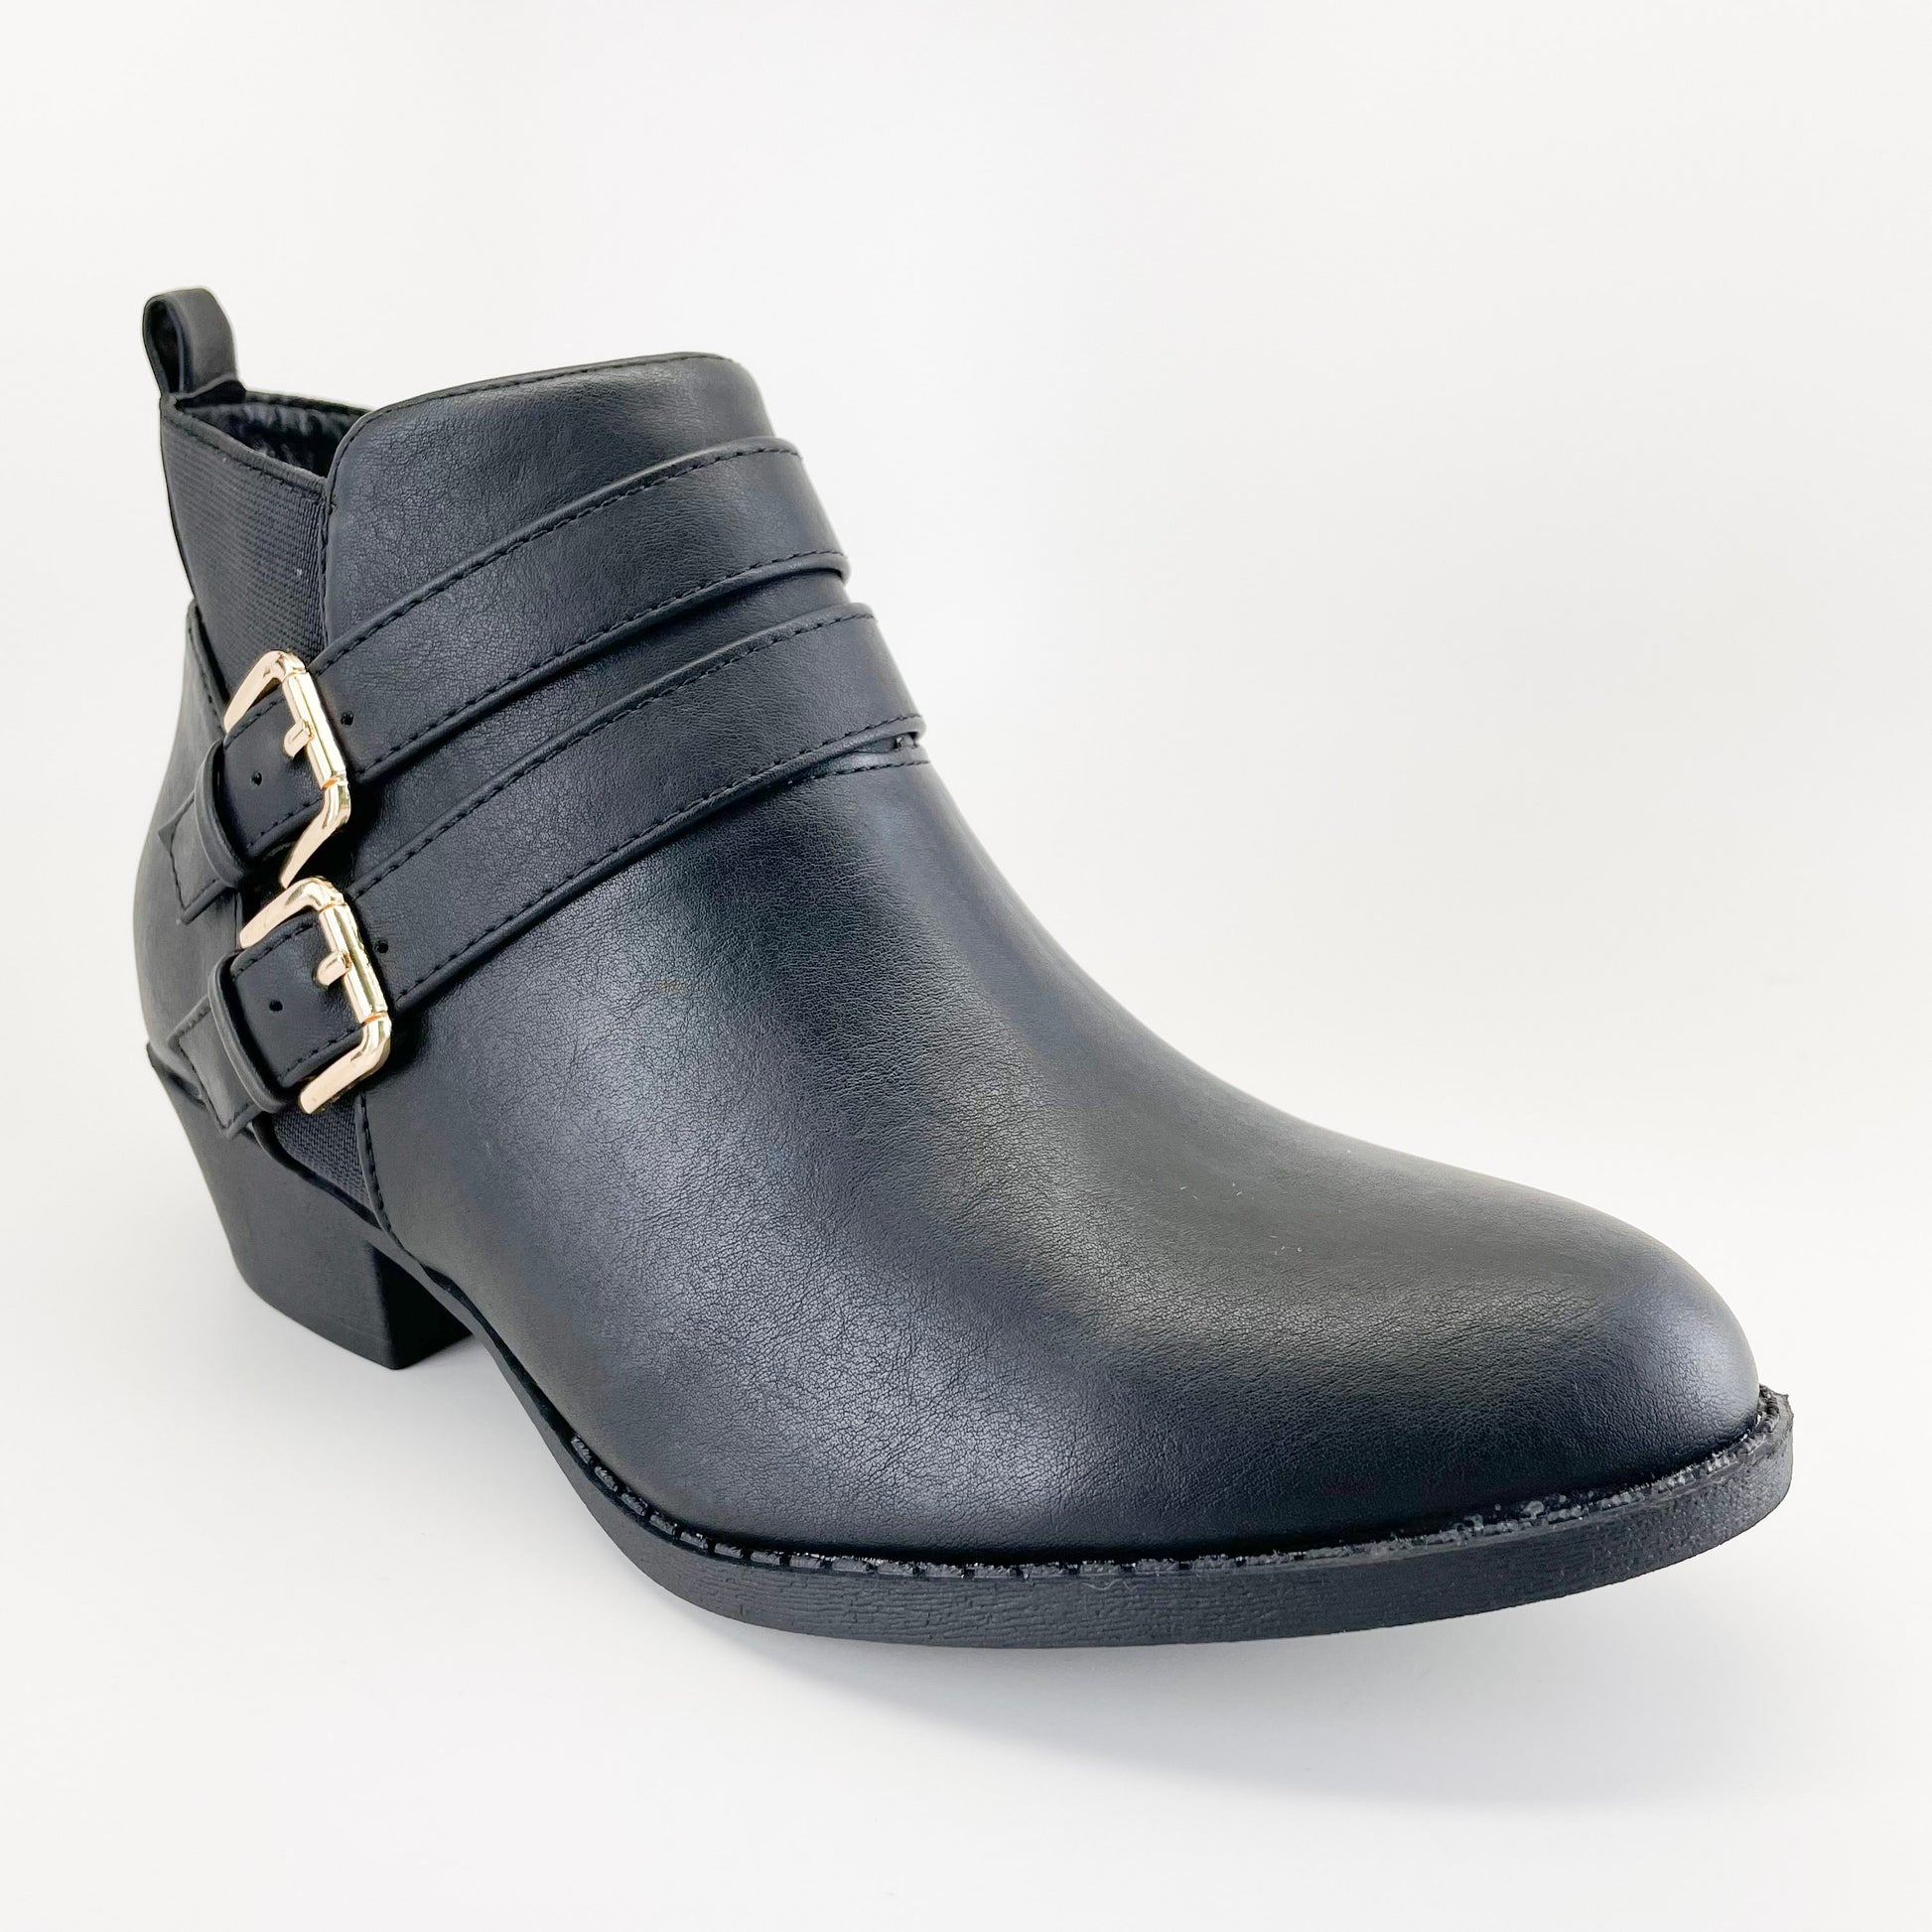 B37-102 black by Lucita. women short ankle boots with buckles, ankle boots with buckles and straps